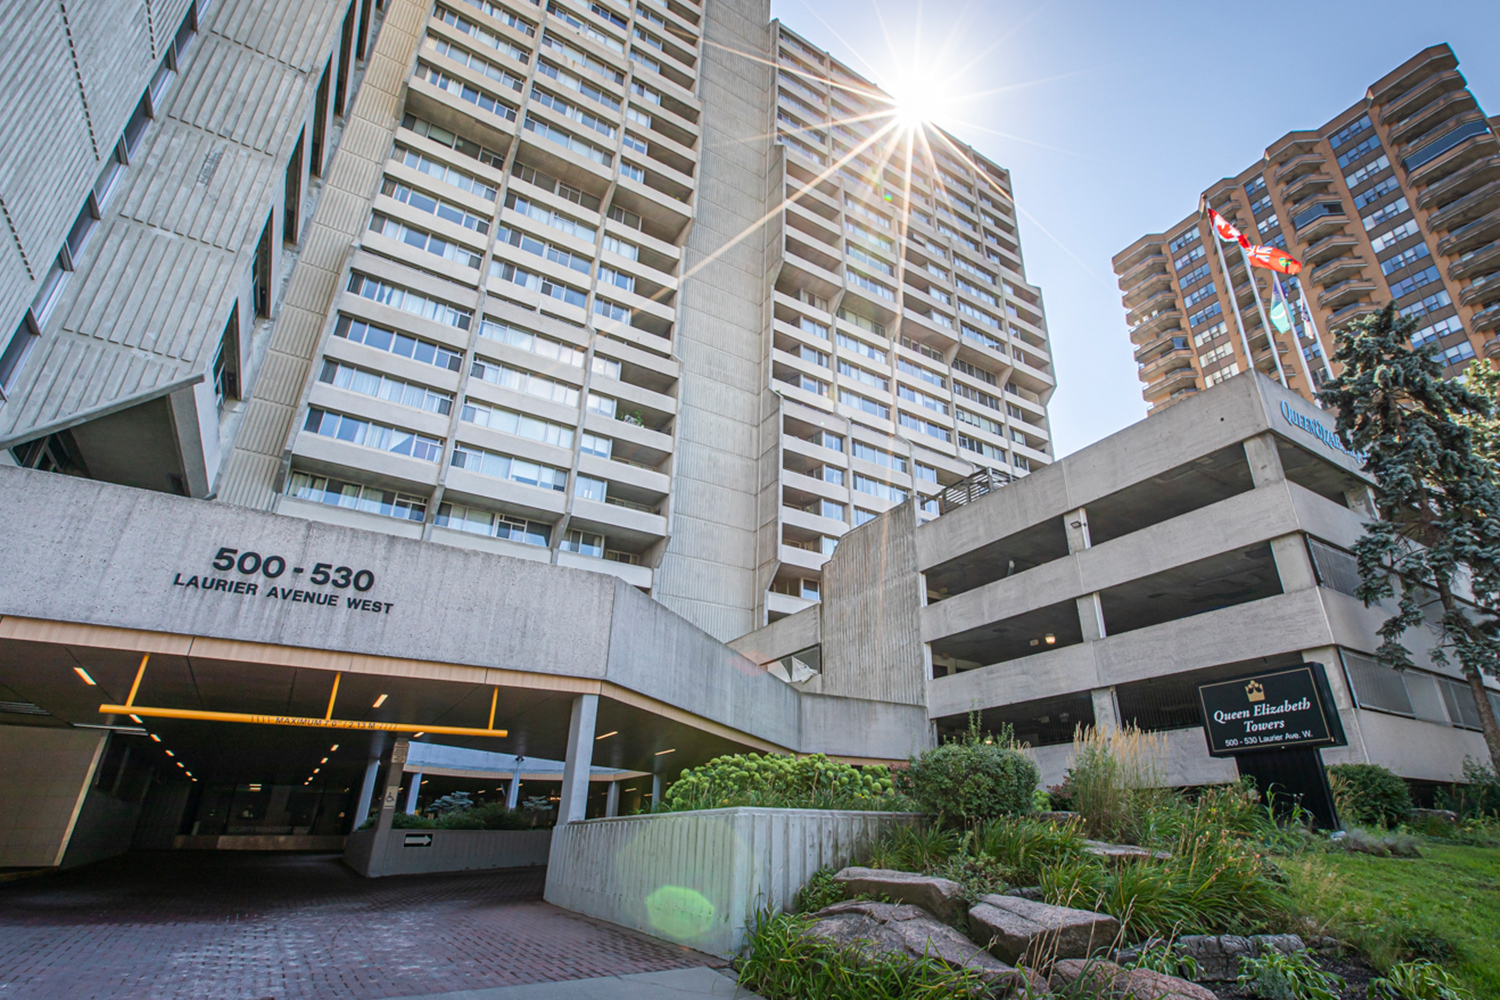 Listing__1530-530-Laurier-Ave-W__01